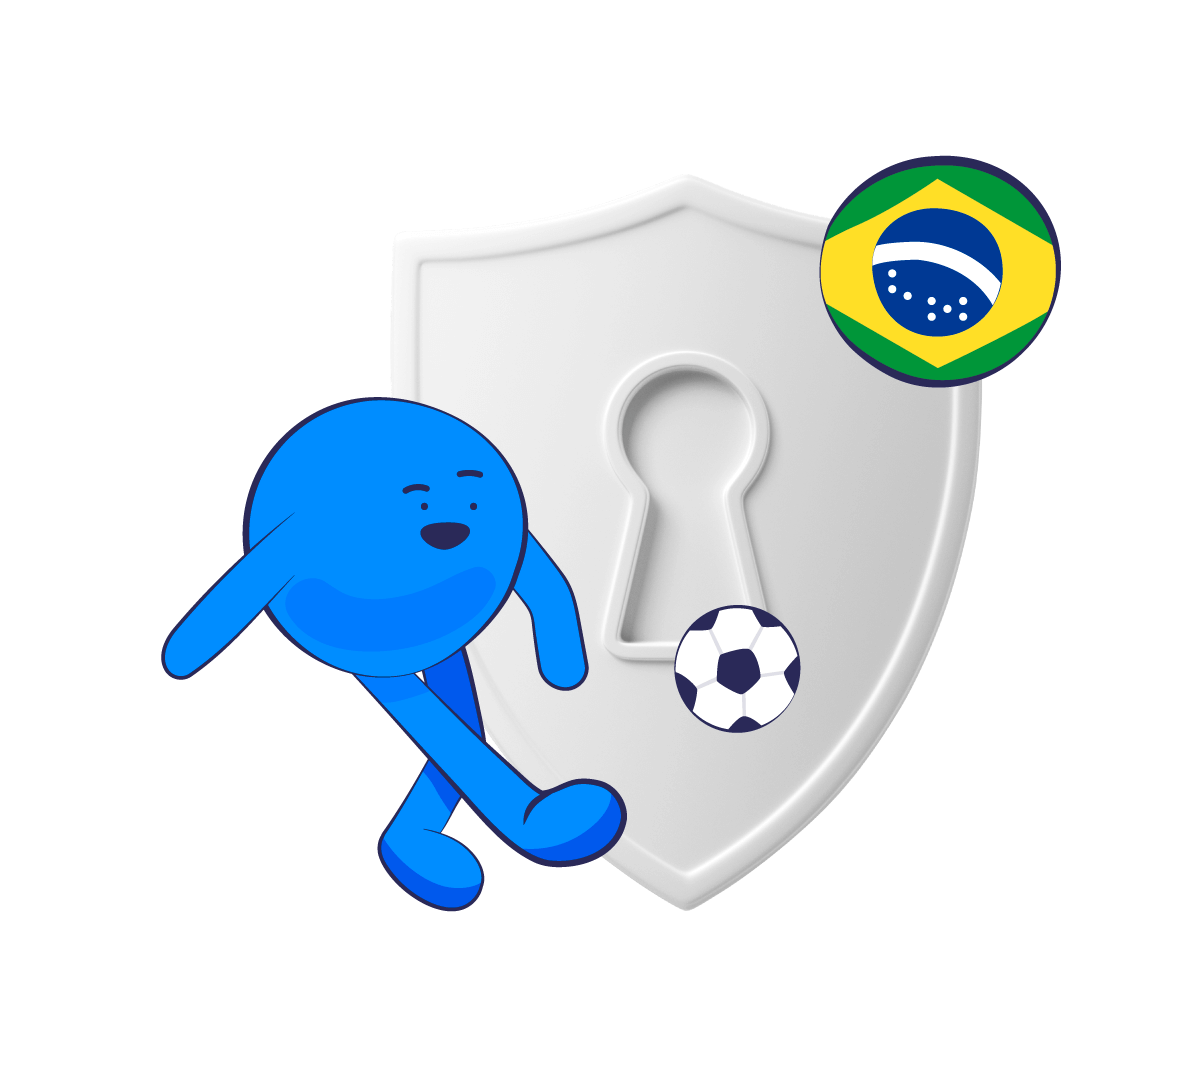 Score a goal for security with Brazil VPN